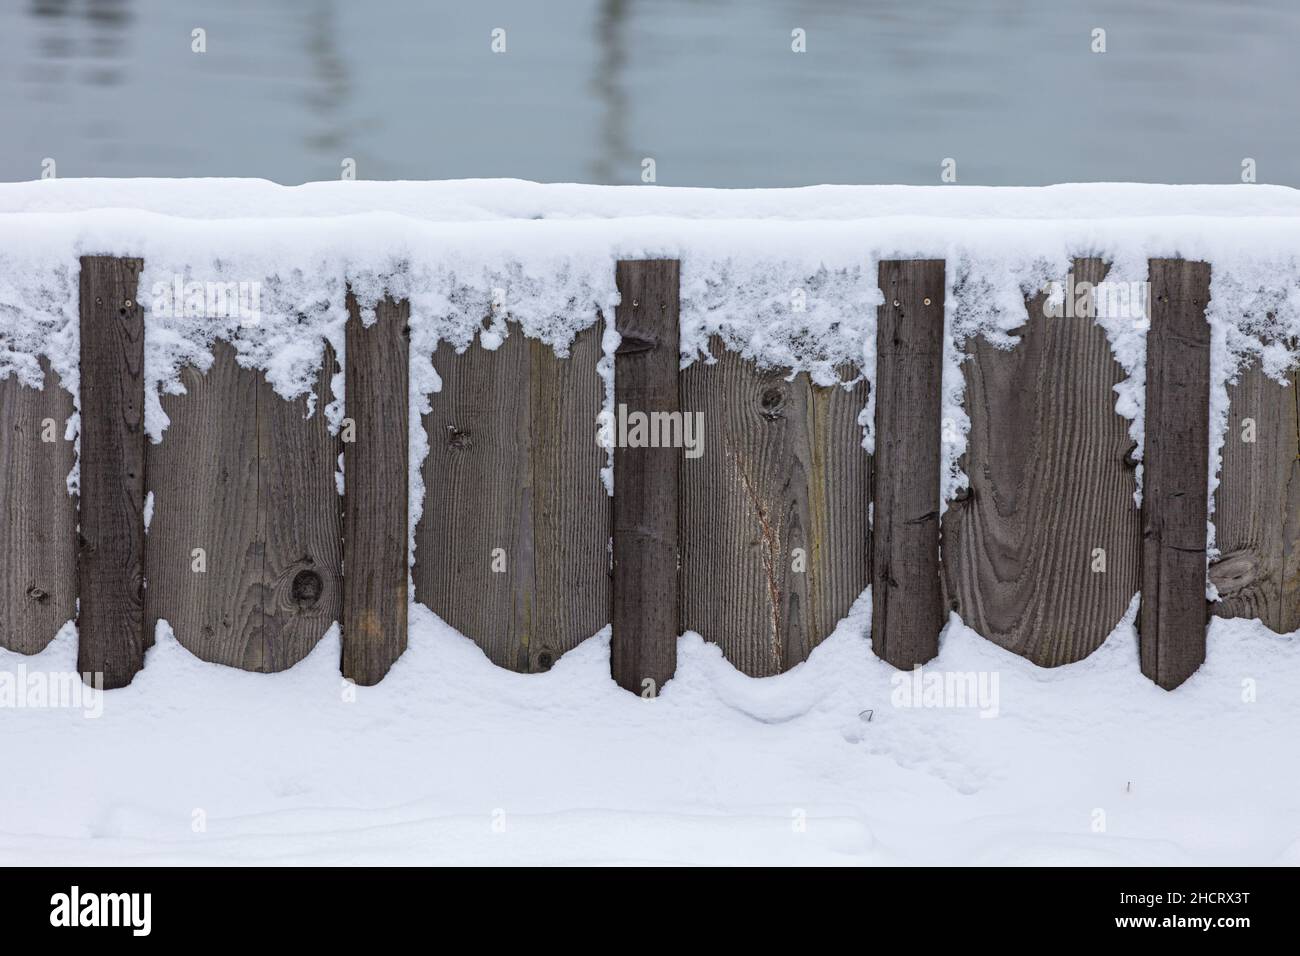 Abstract image of a wooden flood control barrier with snow in Steveston British Columbia Canada Stock Photo